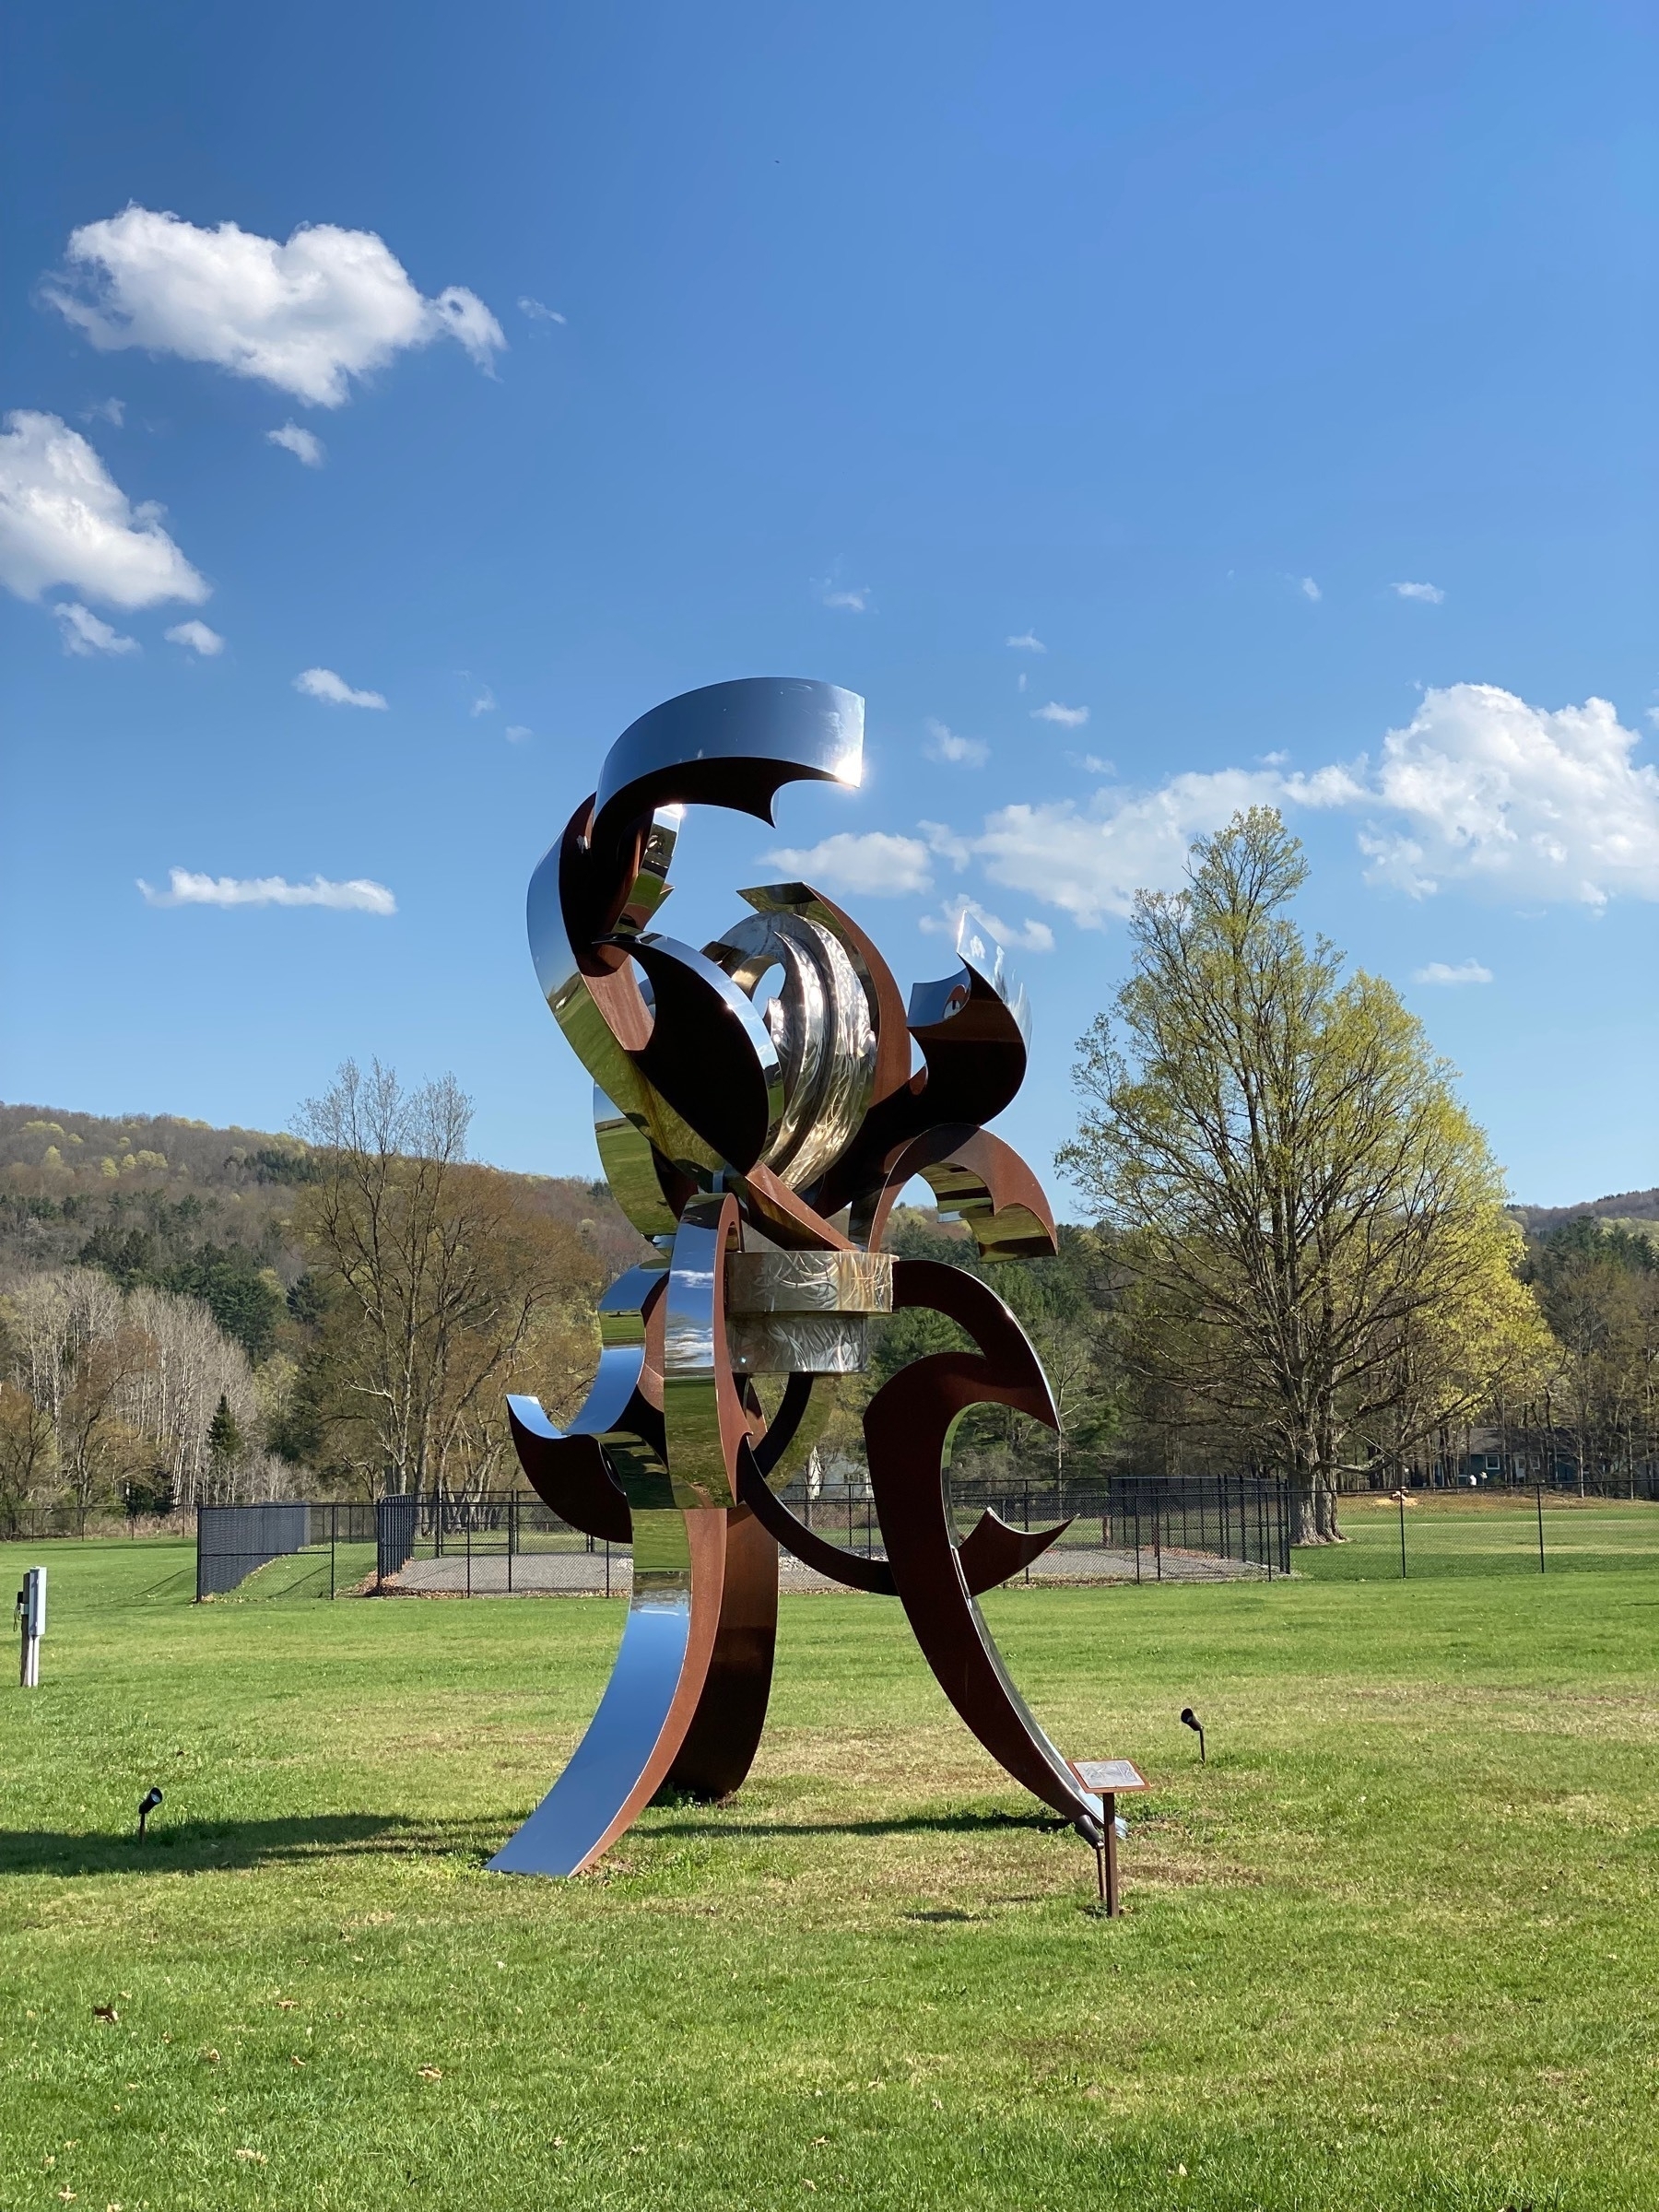 Metal sculpture in a grassy field with trees and hills in the background, a blue sky above.